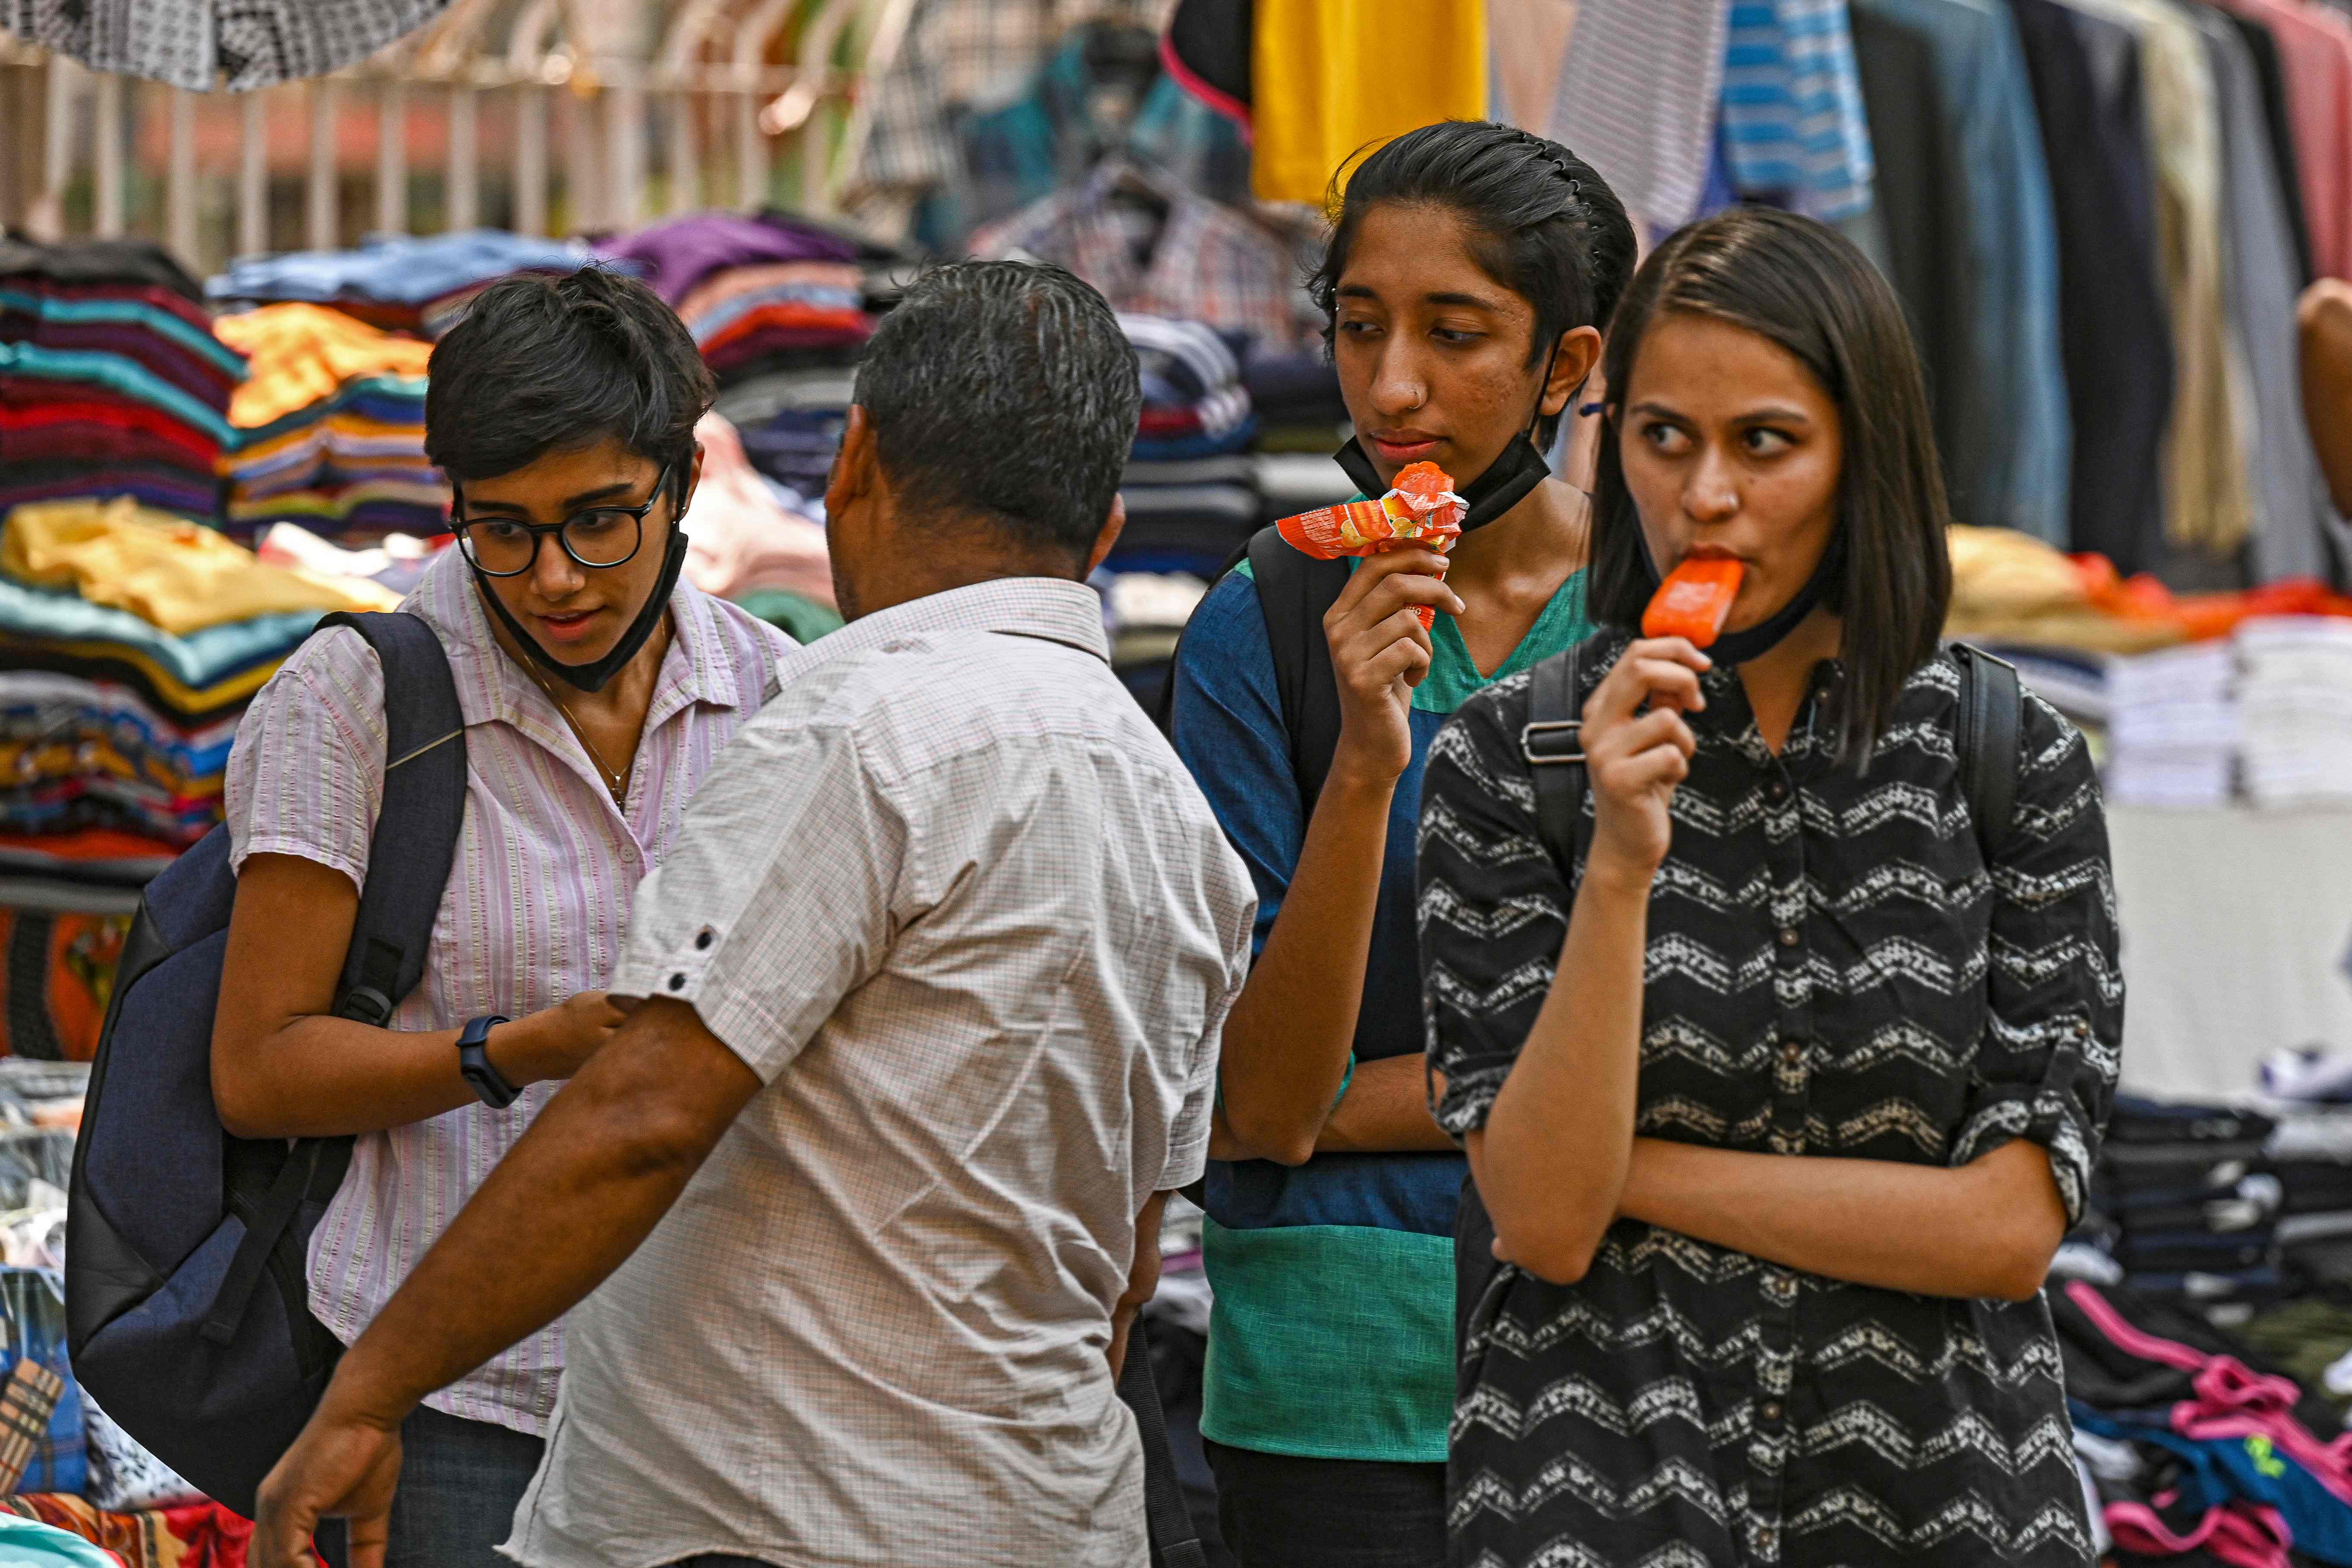 Girls have ice creams while shopping on a hot summer afternoon in New Delhi on 28 April 2022